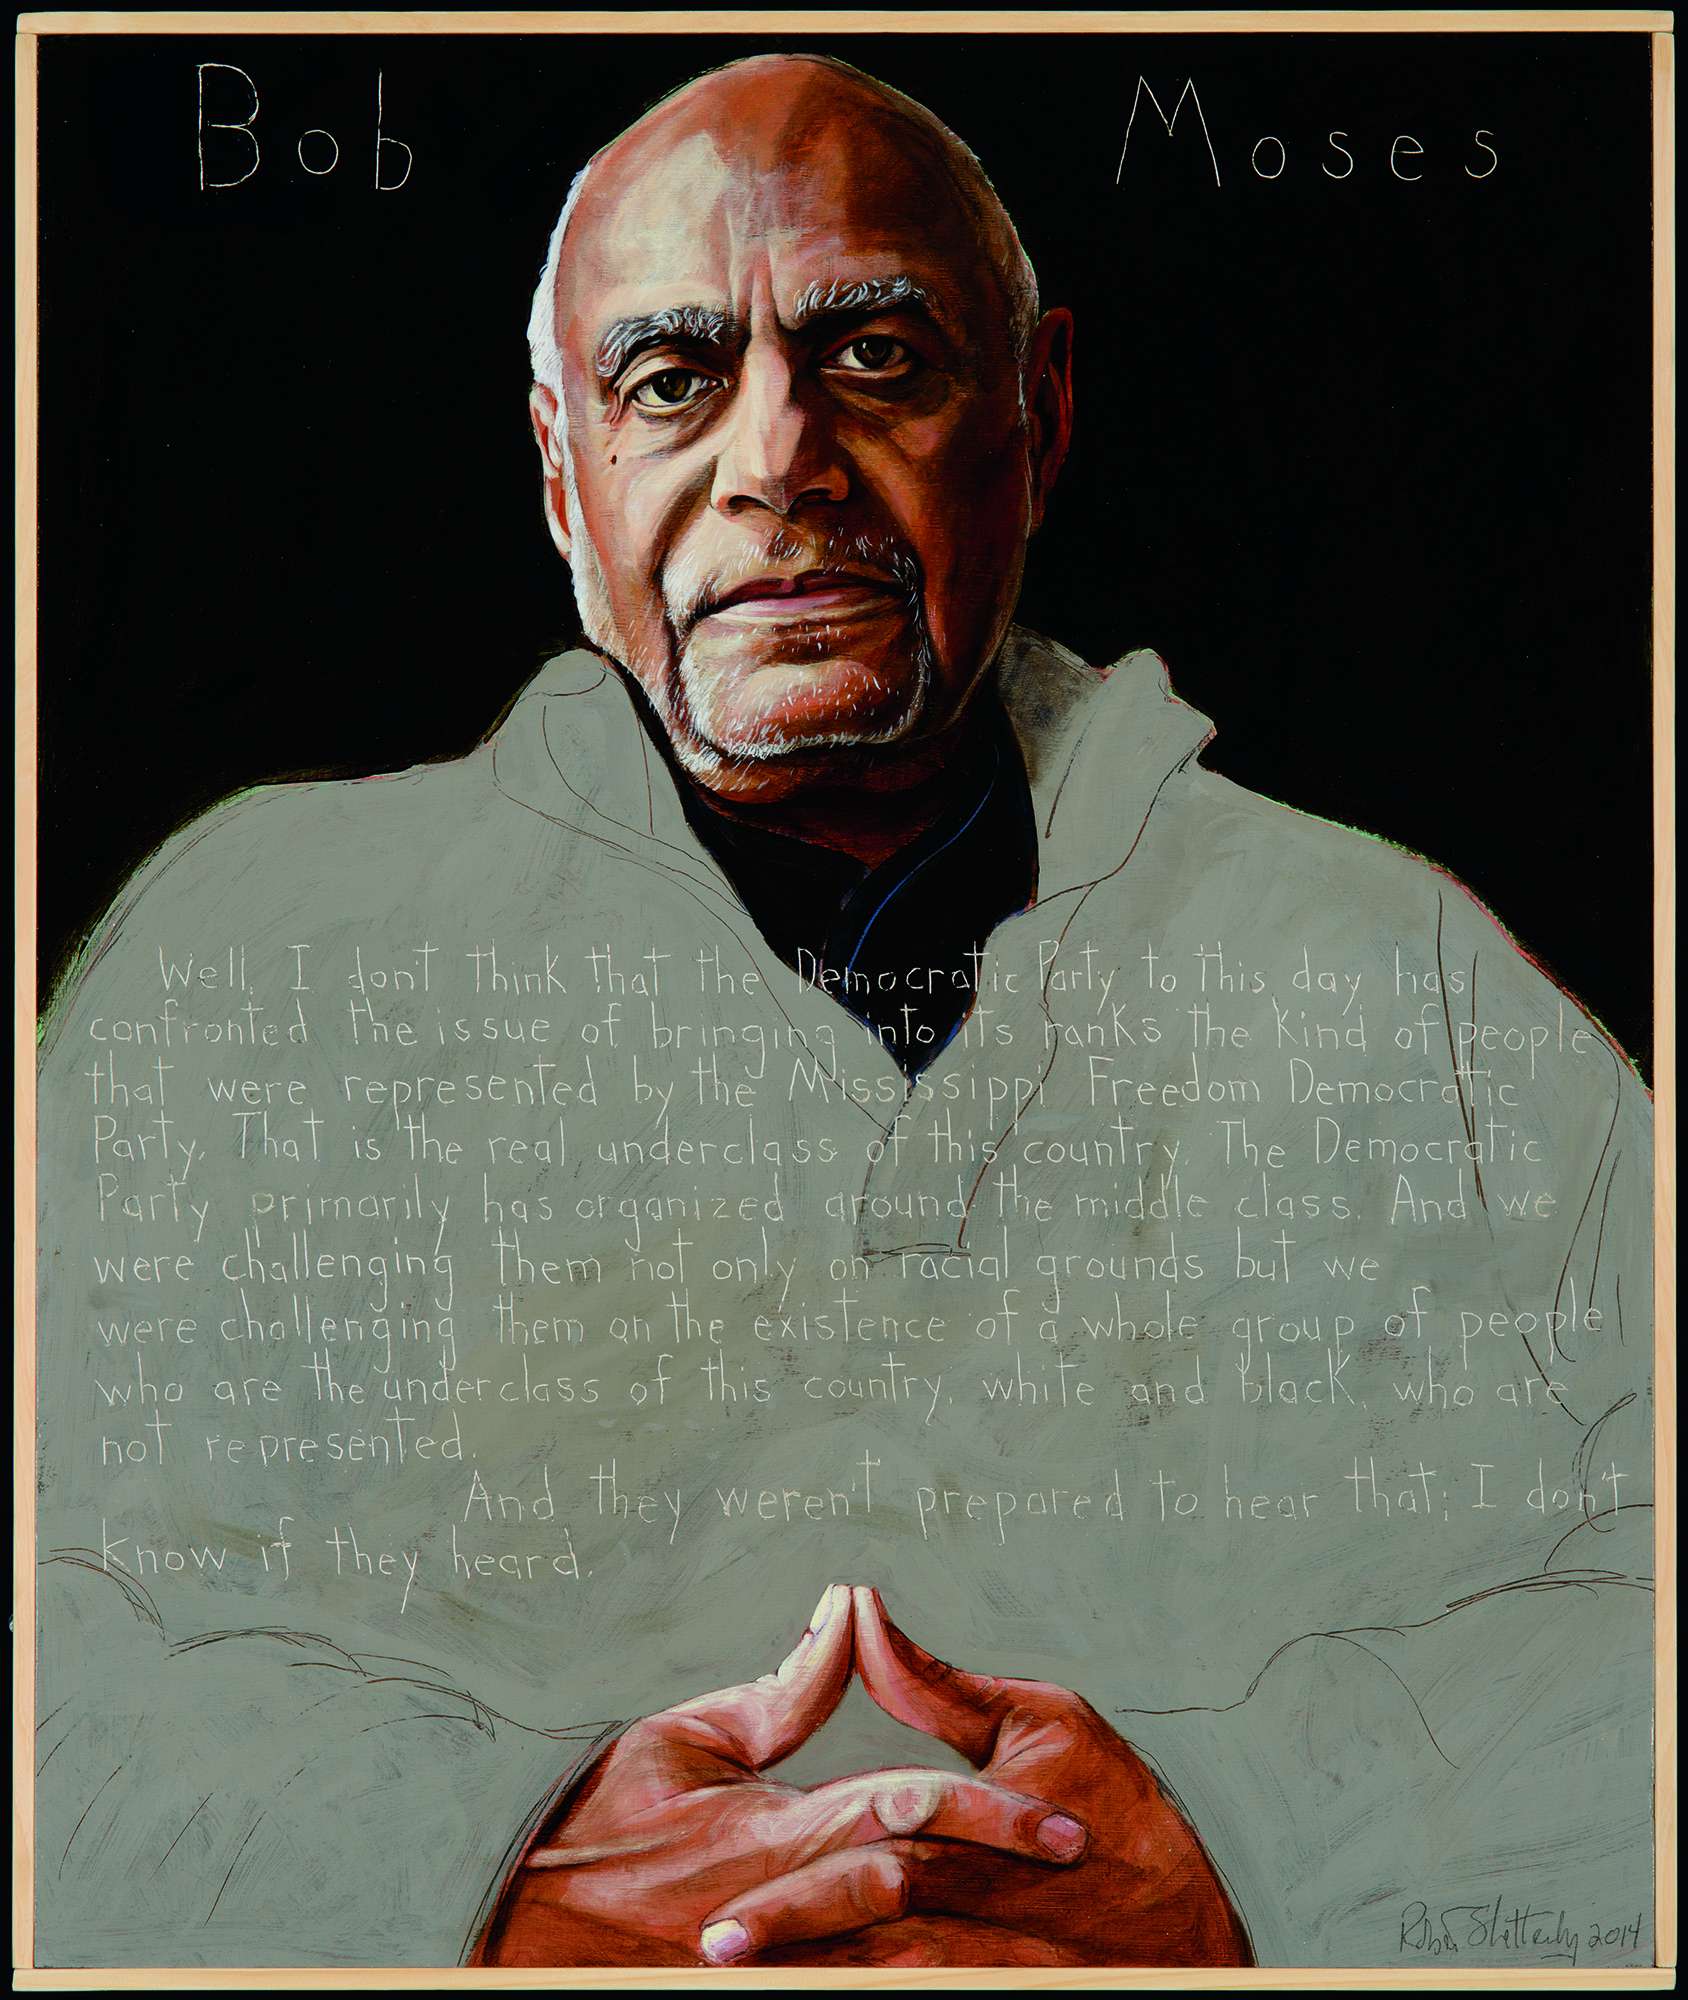 Bob Moses, 2014. Portrait by Robert Shetterly. Courtesy of Americans Who Tell the Truth, www.americans who tell the truth.org.